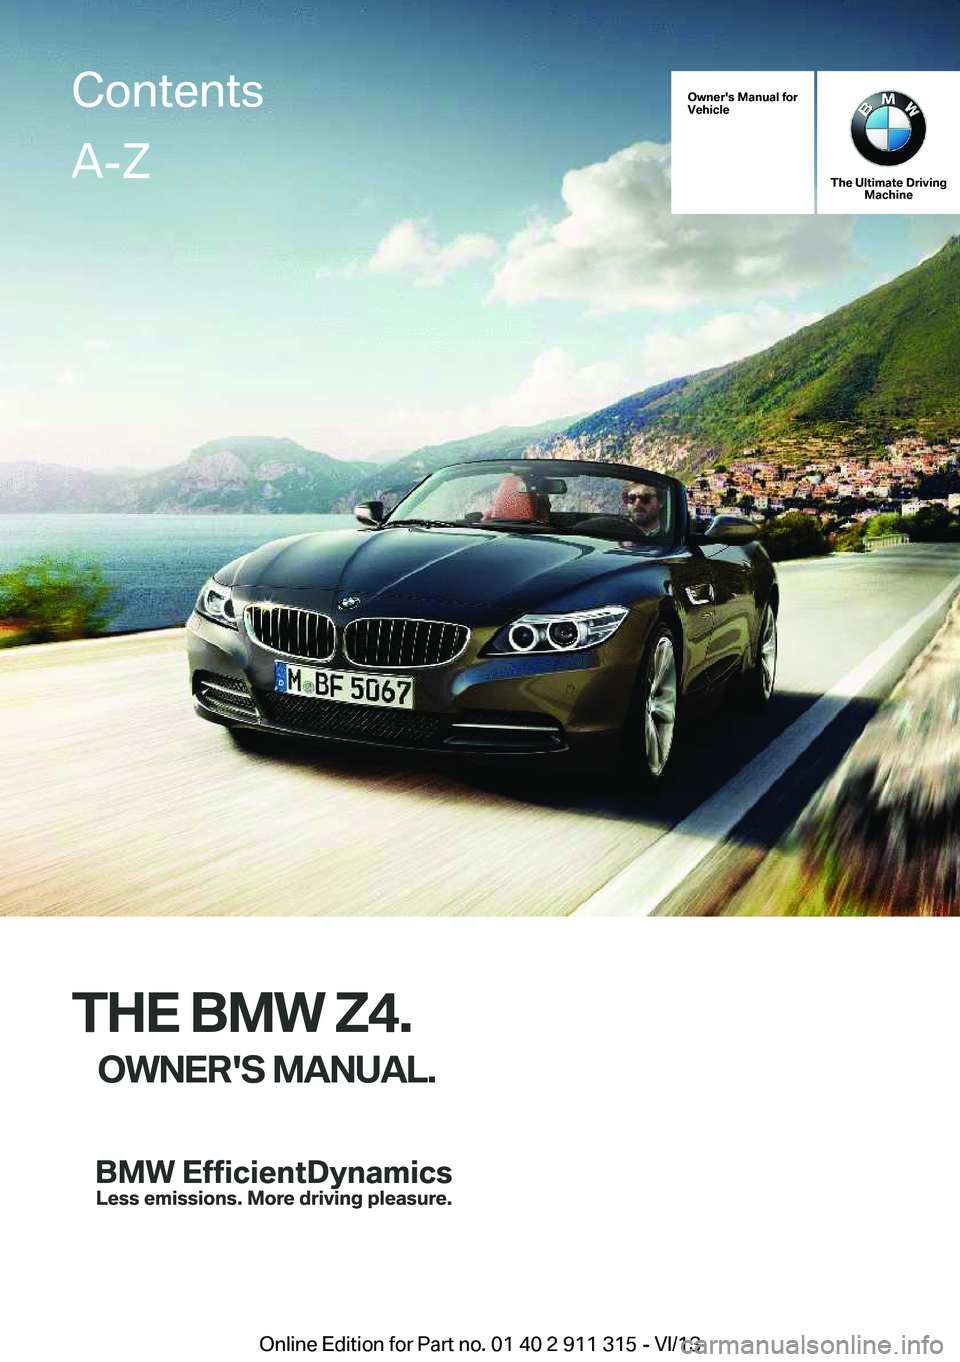 BMW Z4 SDRIVE35I 2014  Owners Manual Owner's Manual for
Vehicle
The Ultimate Driving Machine
THE BMW Z4.
OWNER'S MANUAL.
ContentsA-Z
Online Edition for Part no. 01 40 2 911 315 - VI/13   